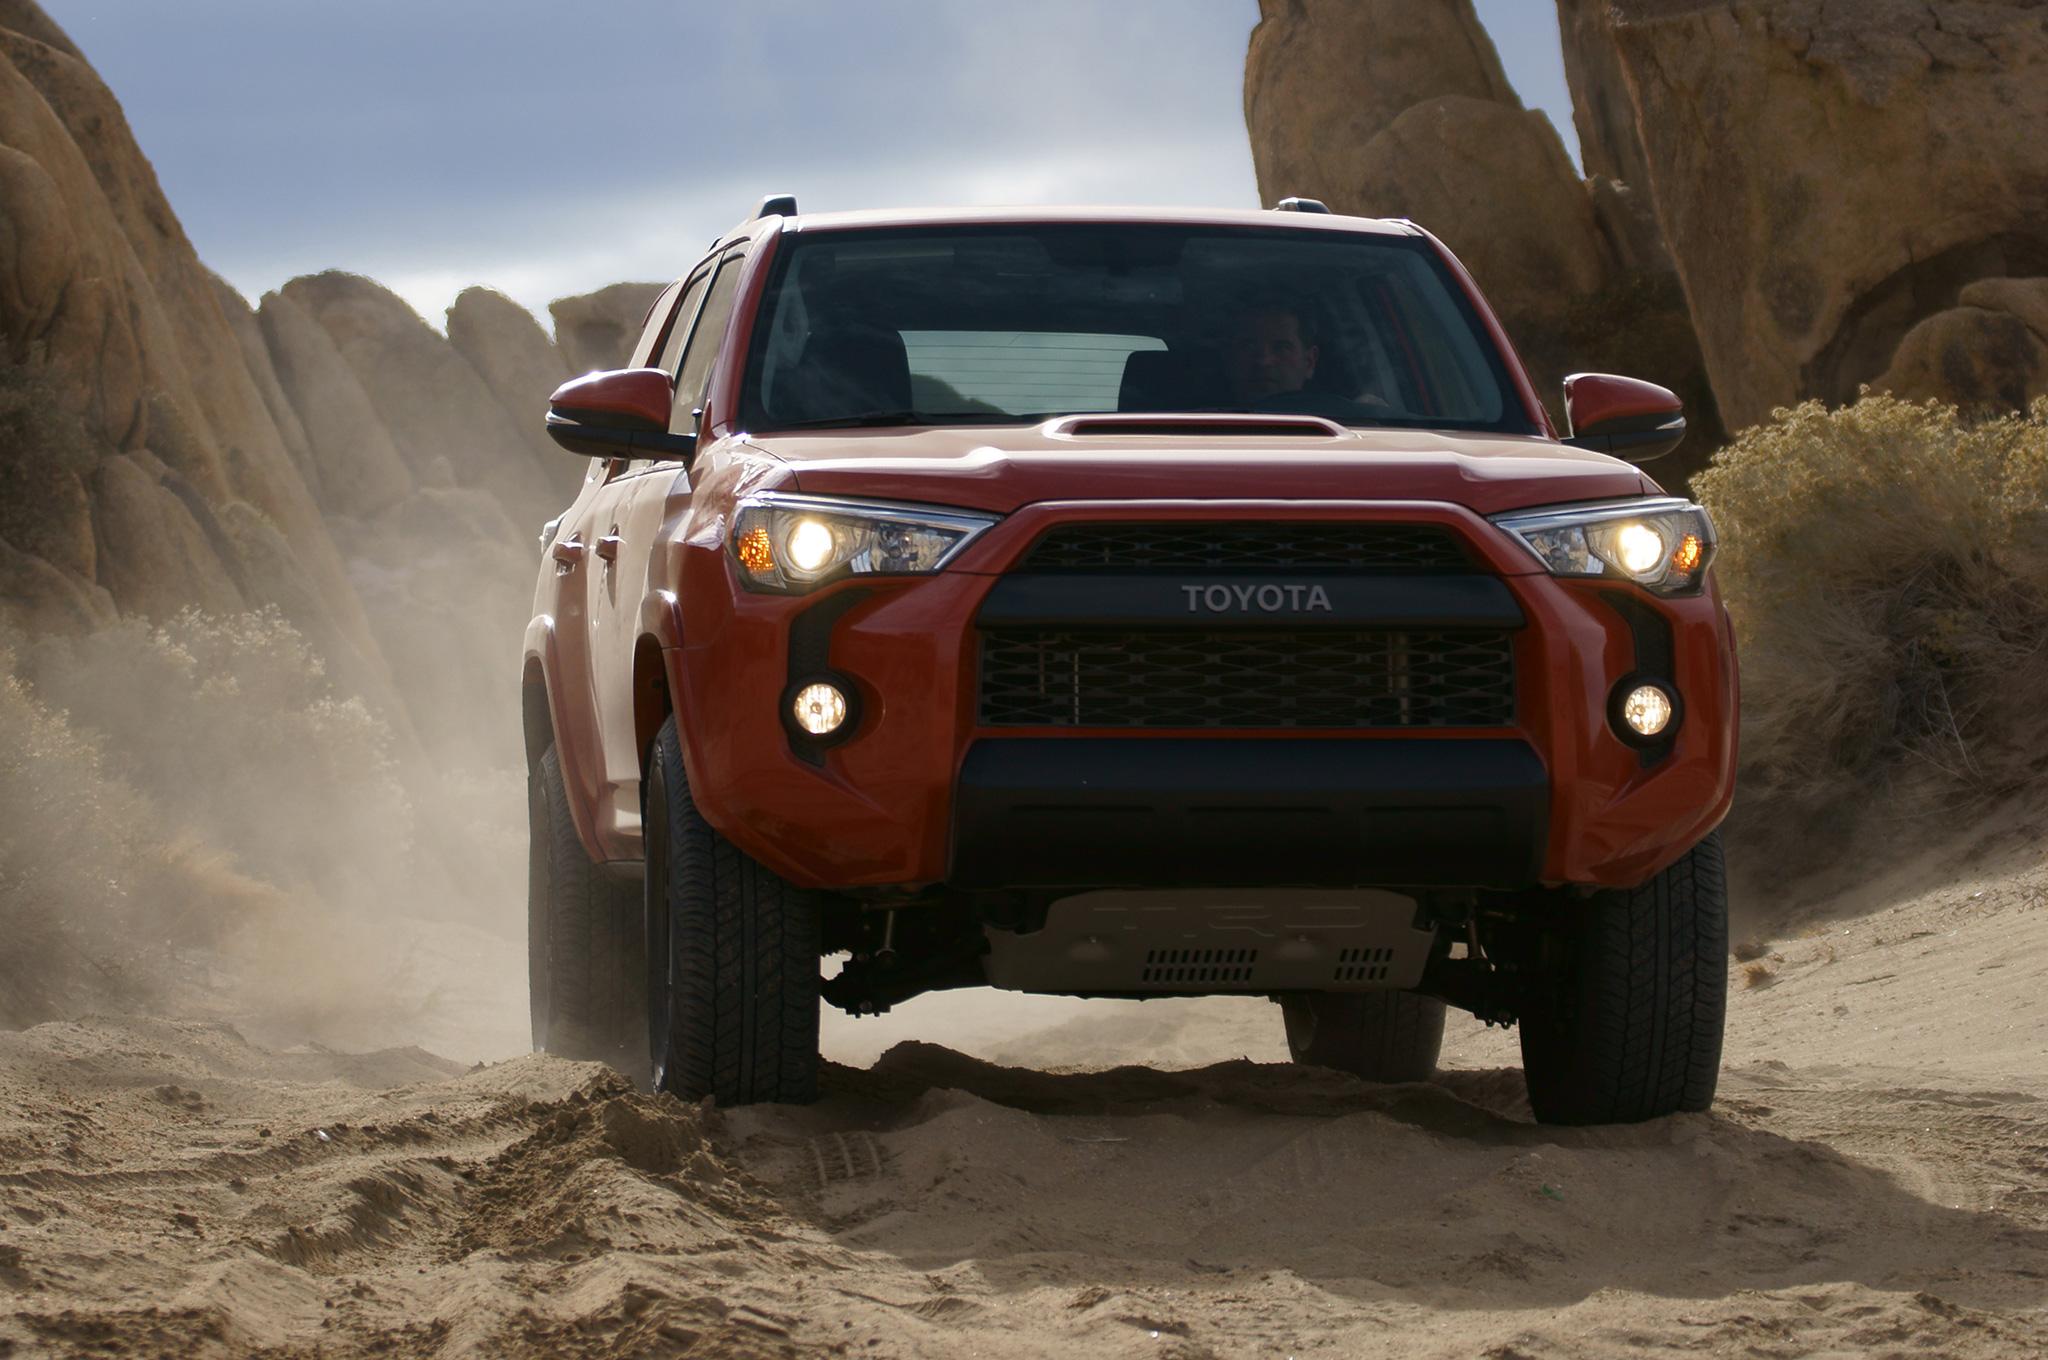 Toyota 4Runner Wallpapers Pictures 61603 2048x1360px.